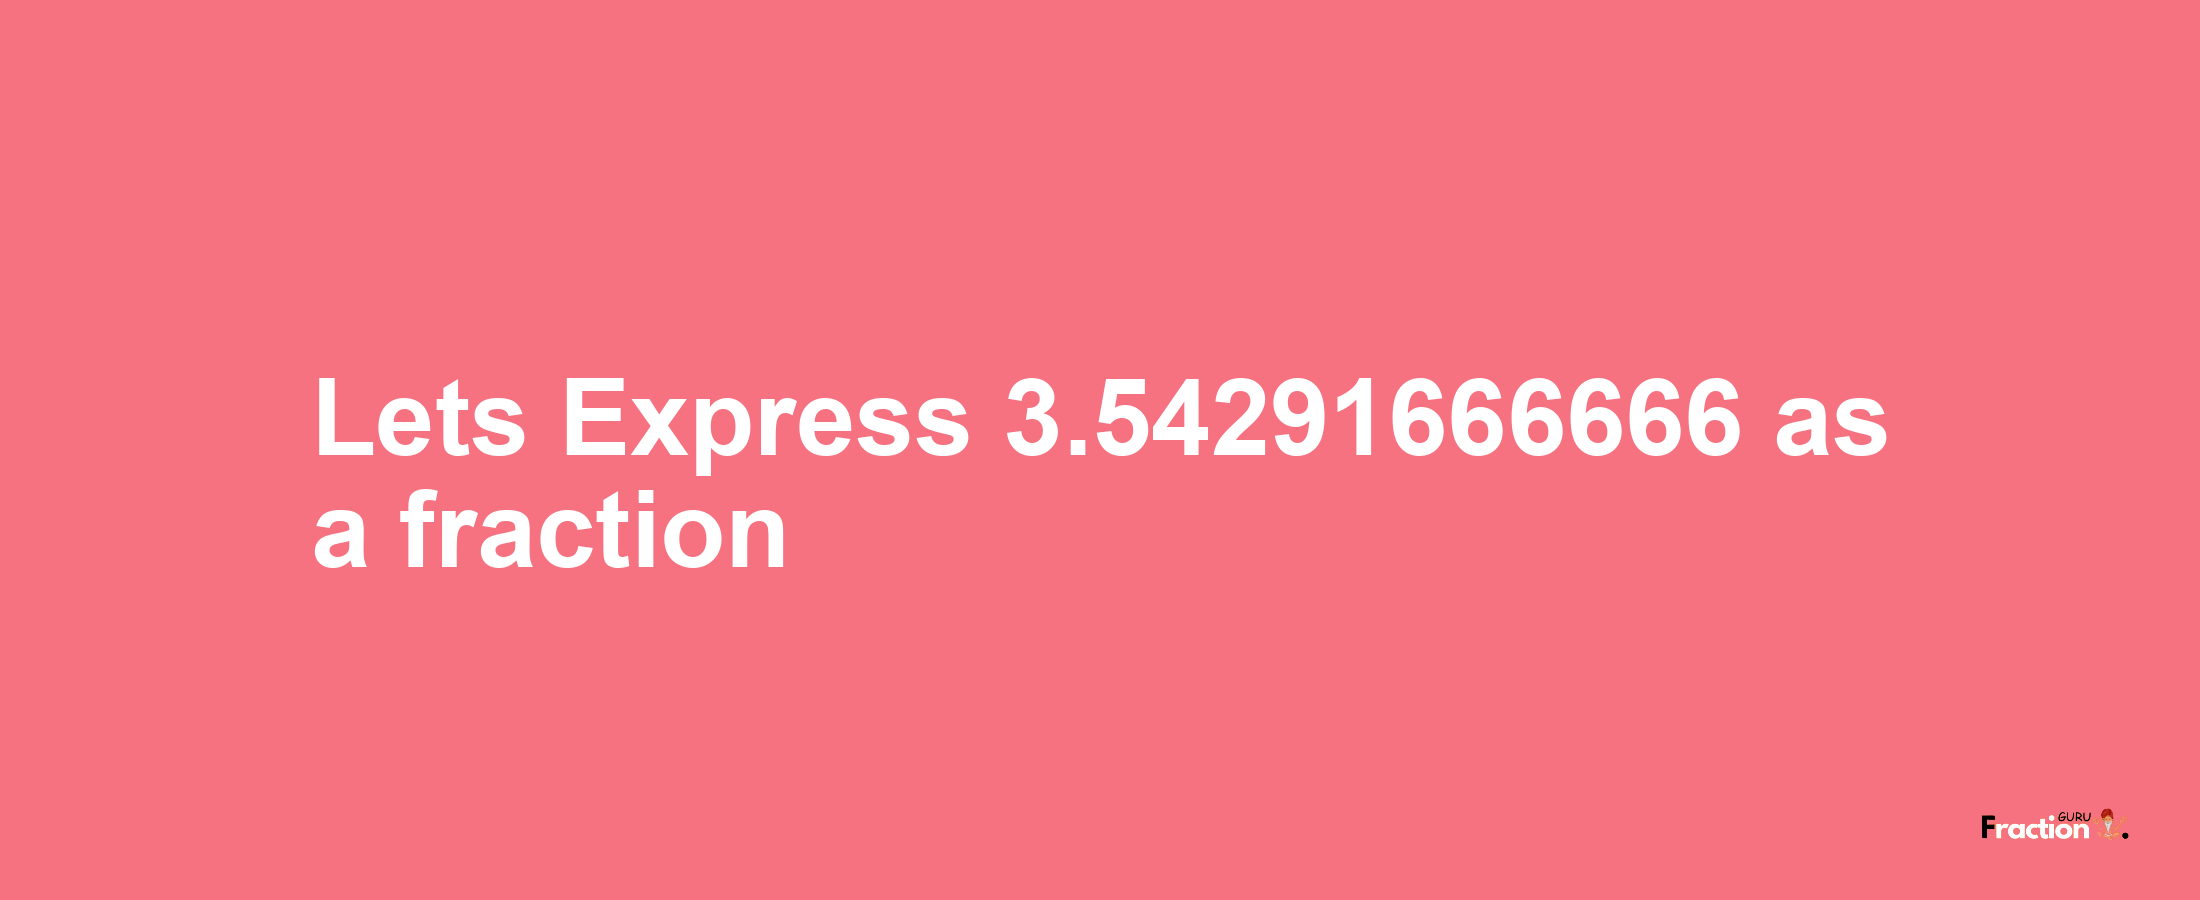 Lets Express 3.54291666666 as afraction